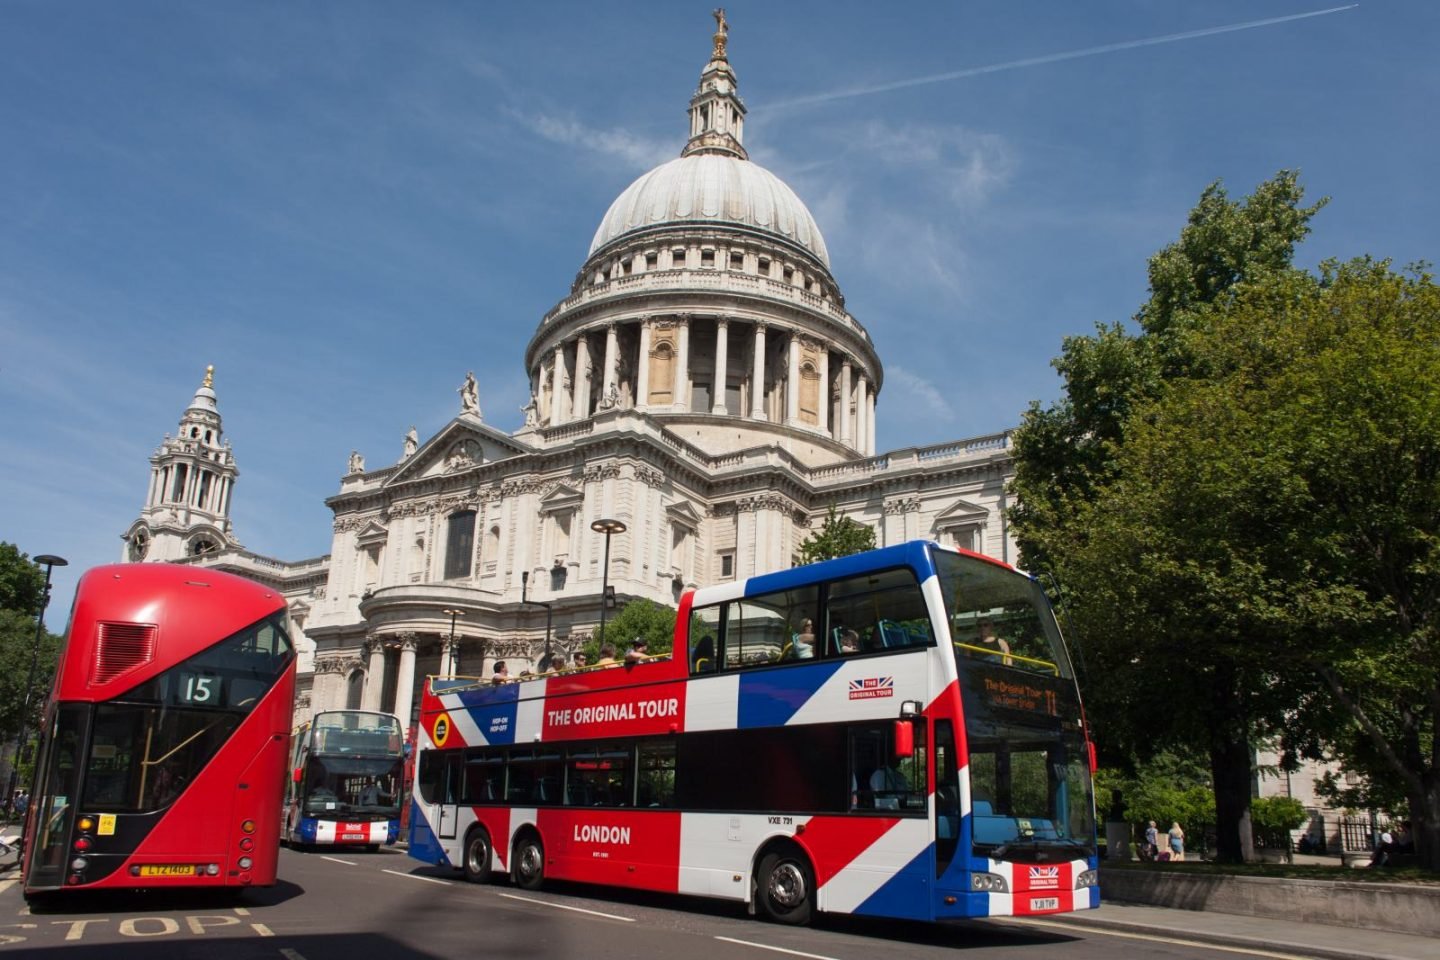 Finding The Best London Bus Tour is a case of knowing what attractions you want to see in London and planning your route with a map.